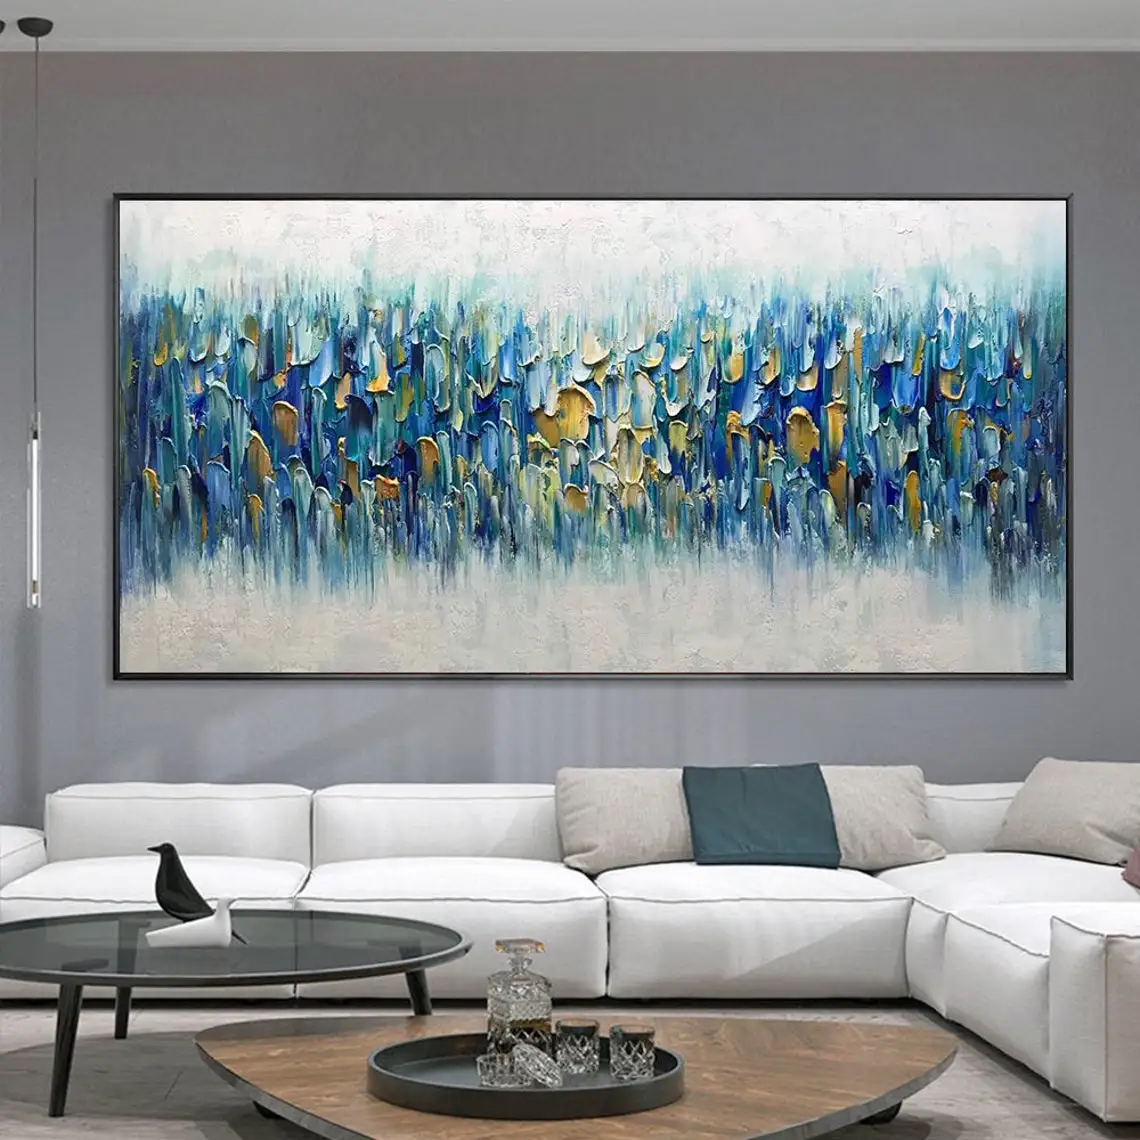 Abstract Oil Painting Handmade on Canvas Textured Boho Wall Art Golden Acrylic Painting Modern Living Room Home Decor